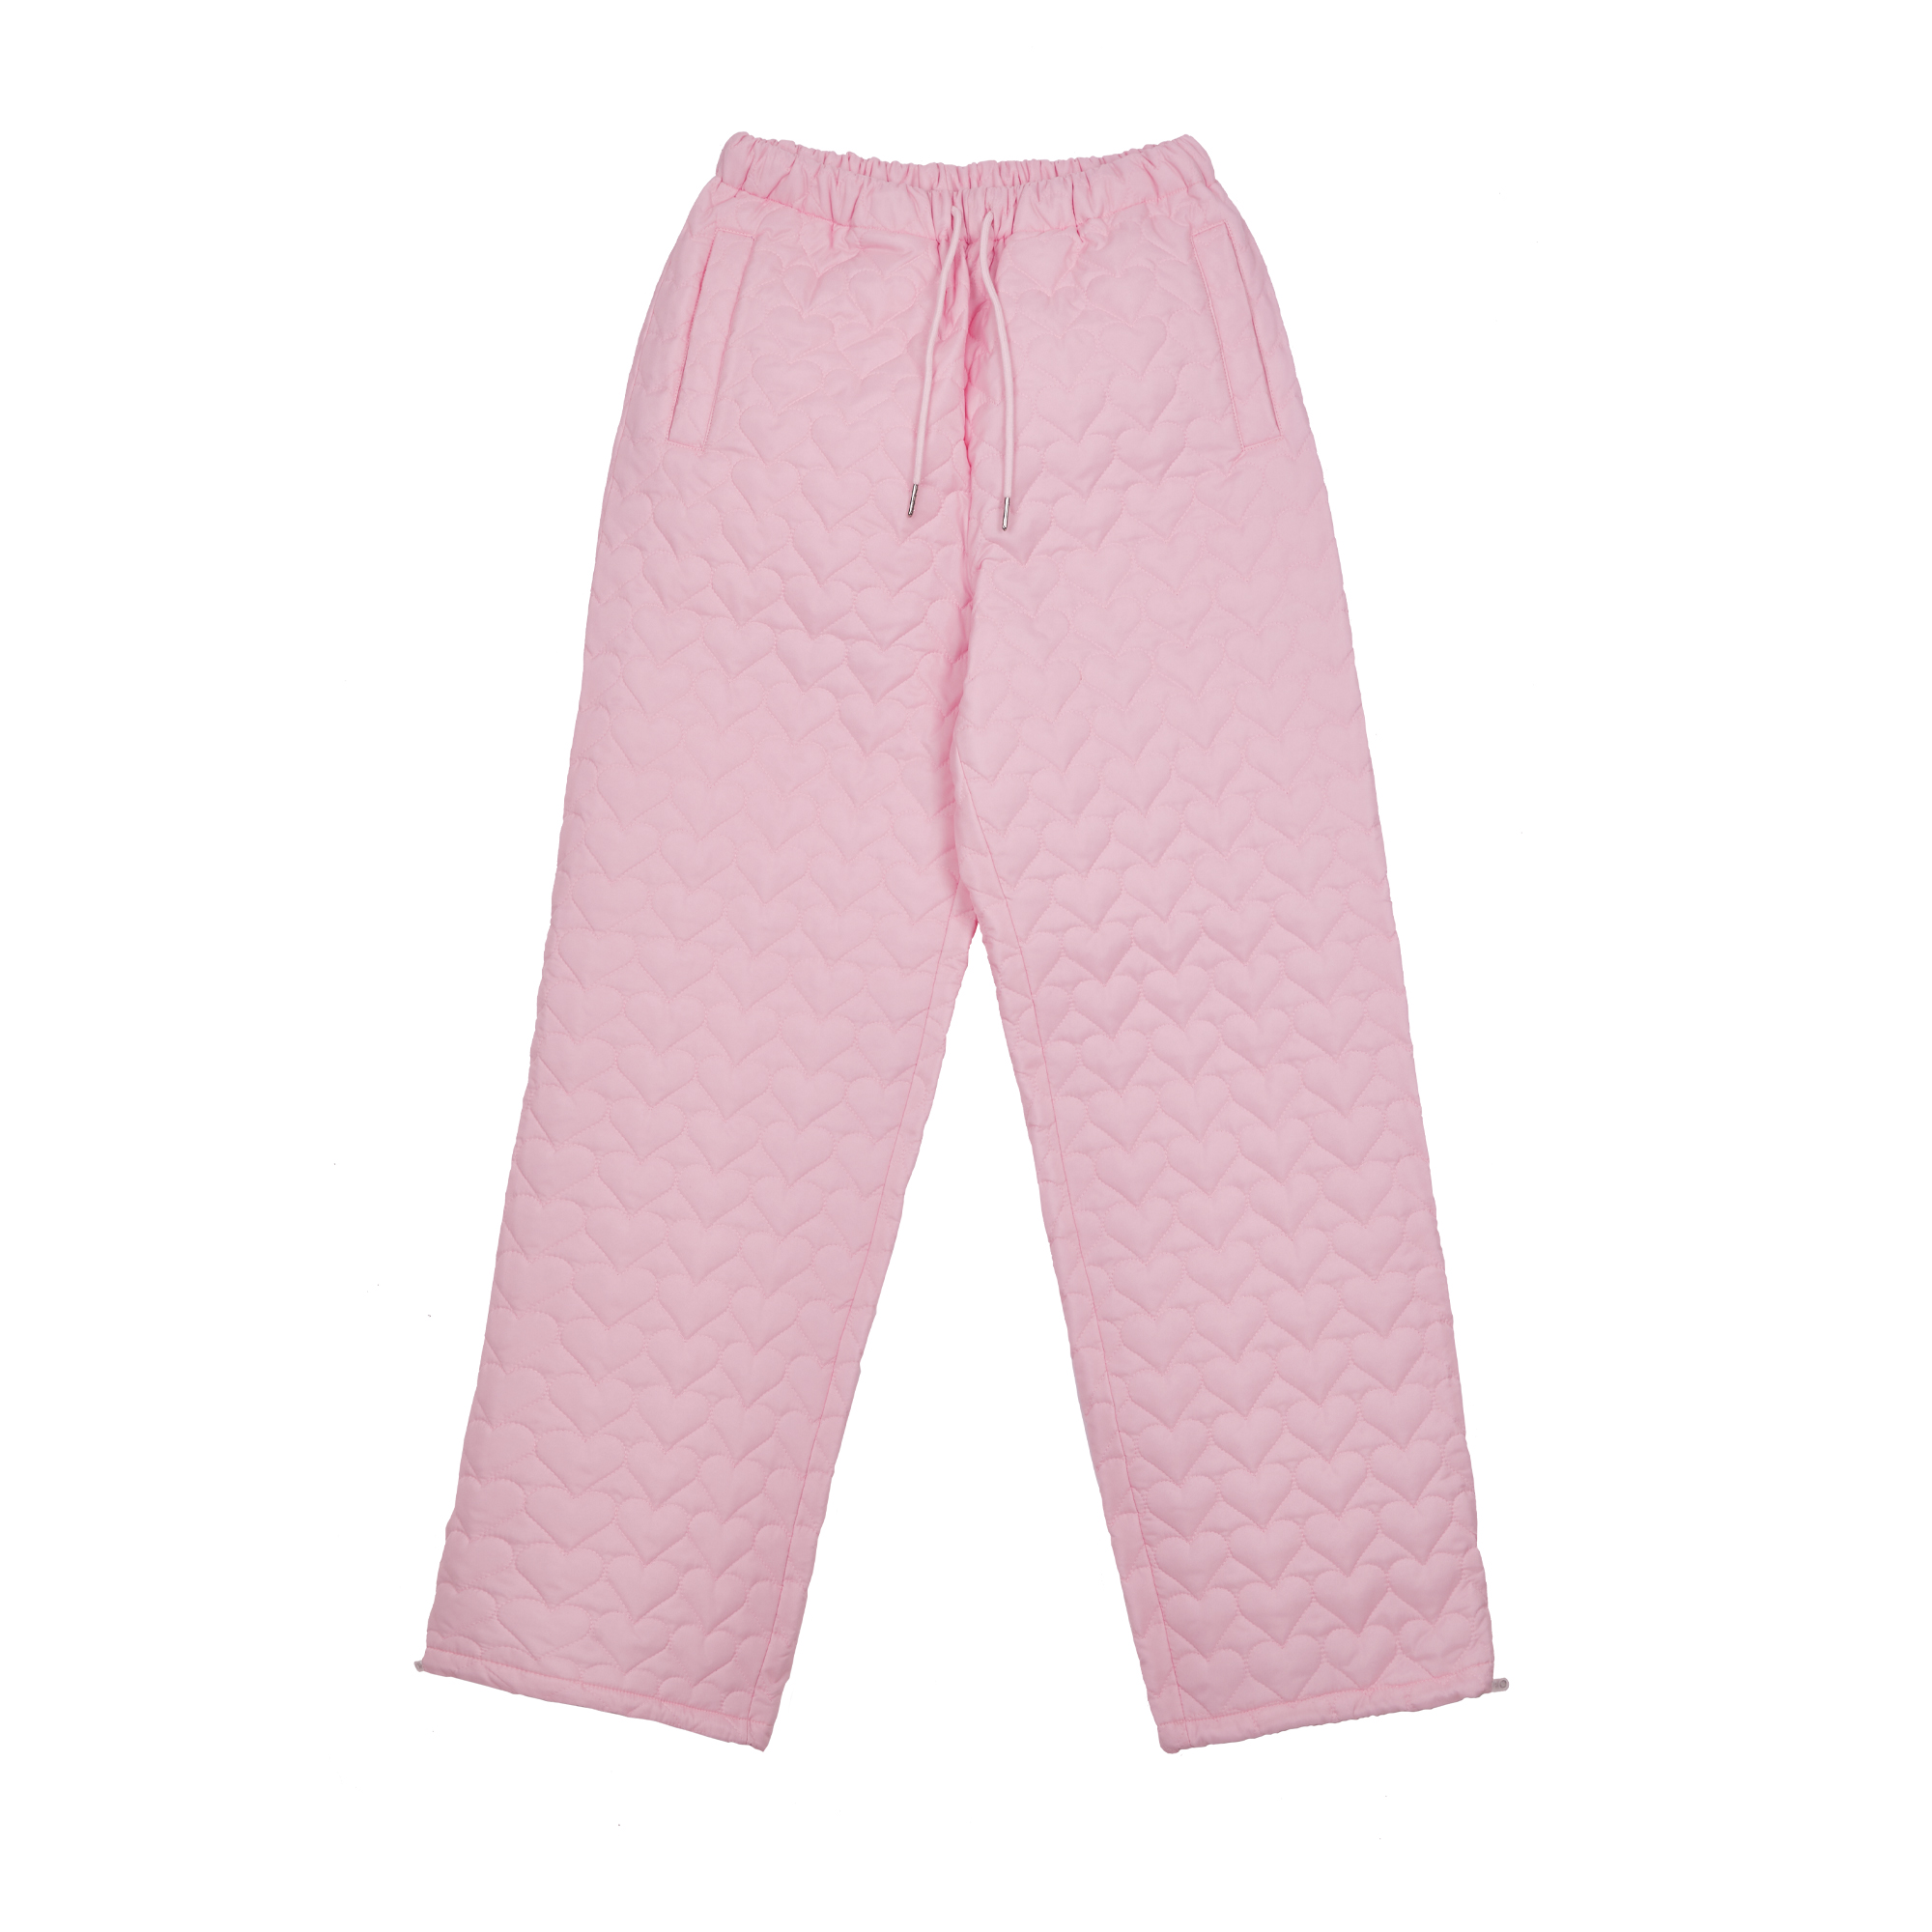 Sallysoom heart quilting pants for adult (Pink)